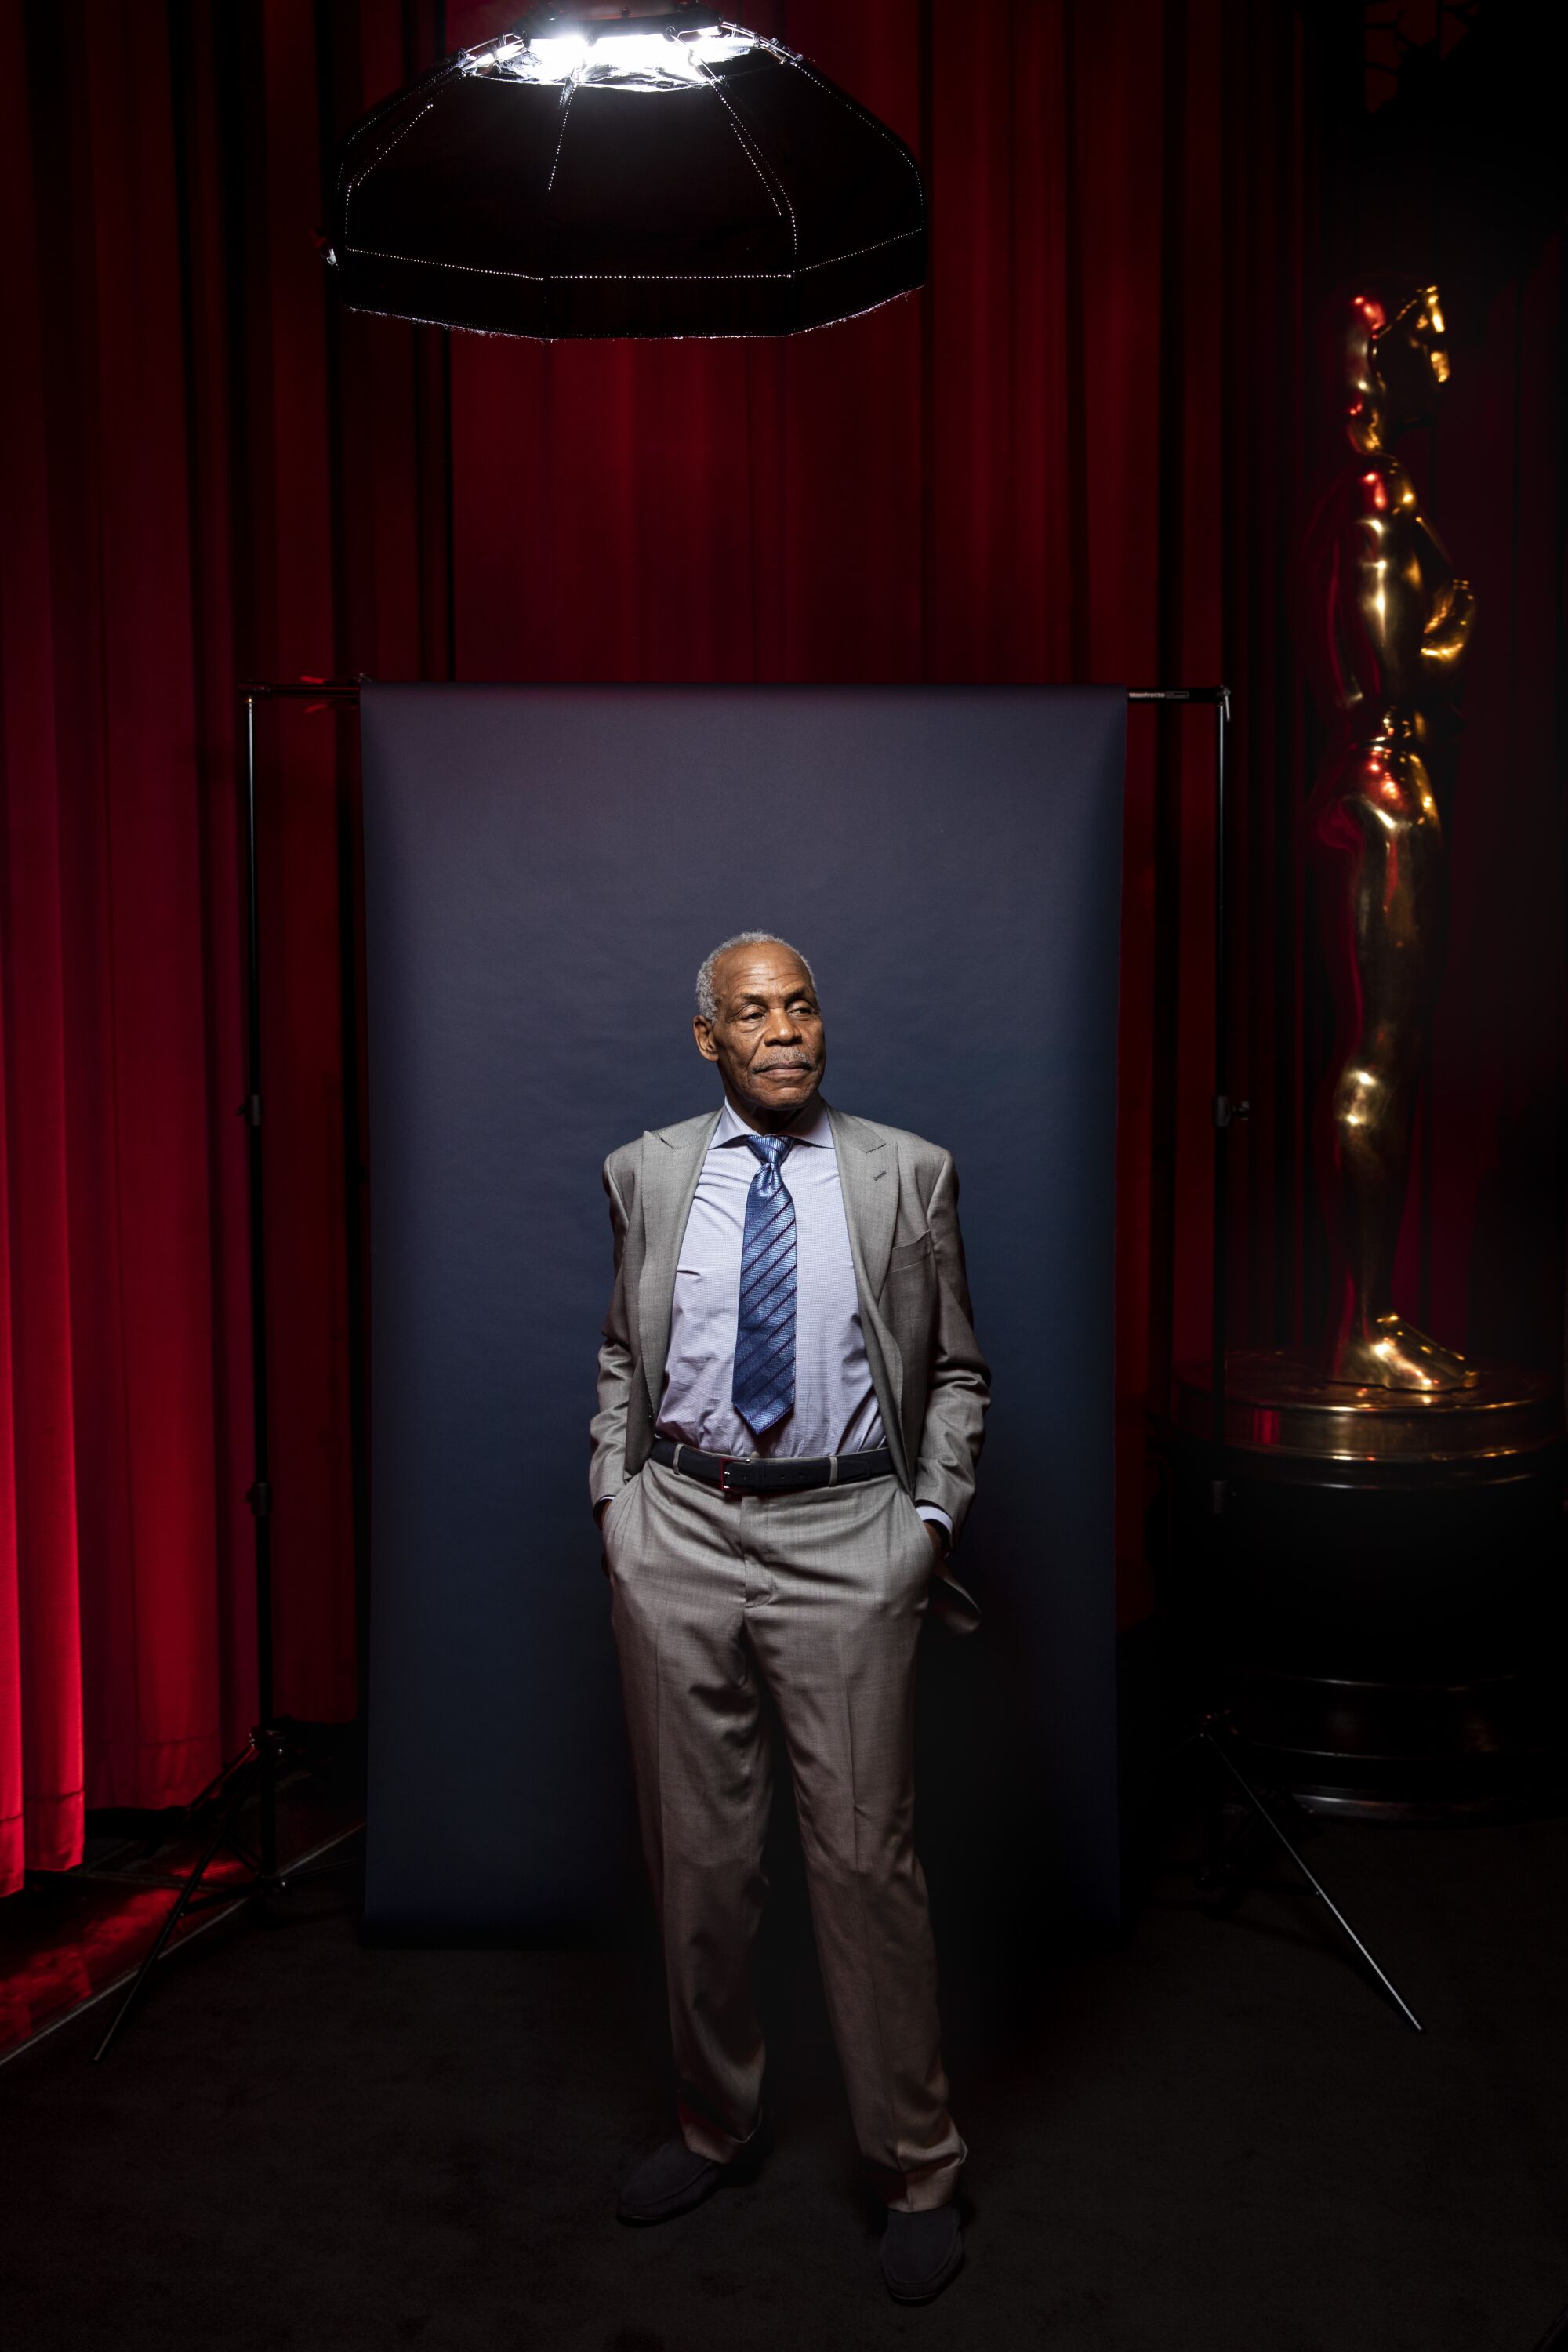 Actor Danny Glover poses for a portrait.